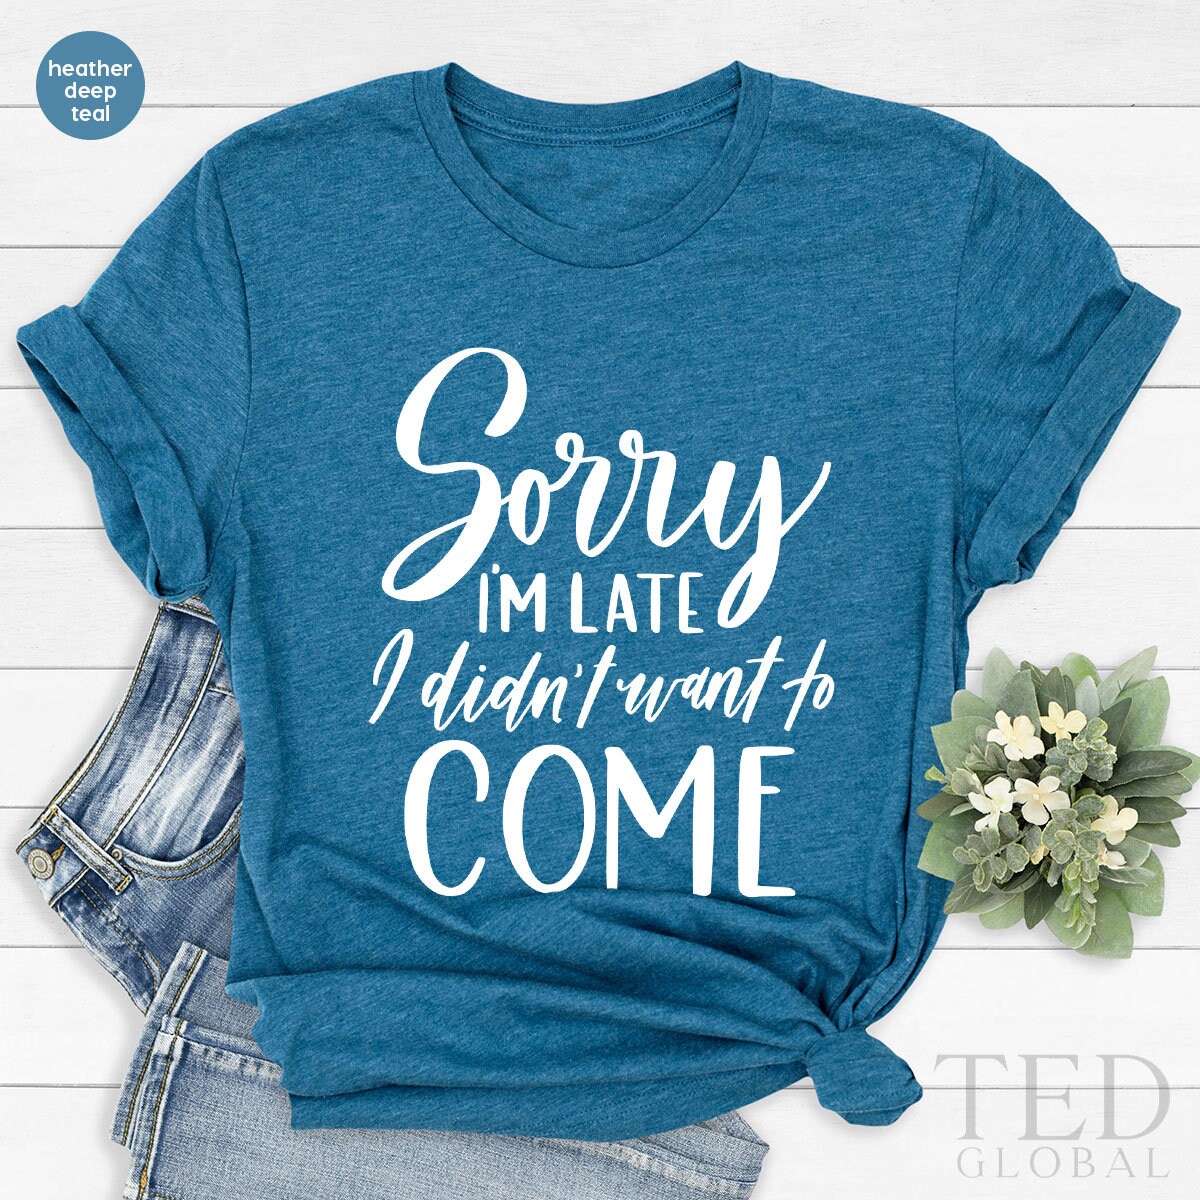 Funny Quote Shirt, Funny Sarcastic Tee, Humorous TShirt, Adult Humor Shirt, Introvert Gift, Sorry Im Late I Didnt Want To Come,Sassy T Shirt - Fastdeliverytees.com